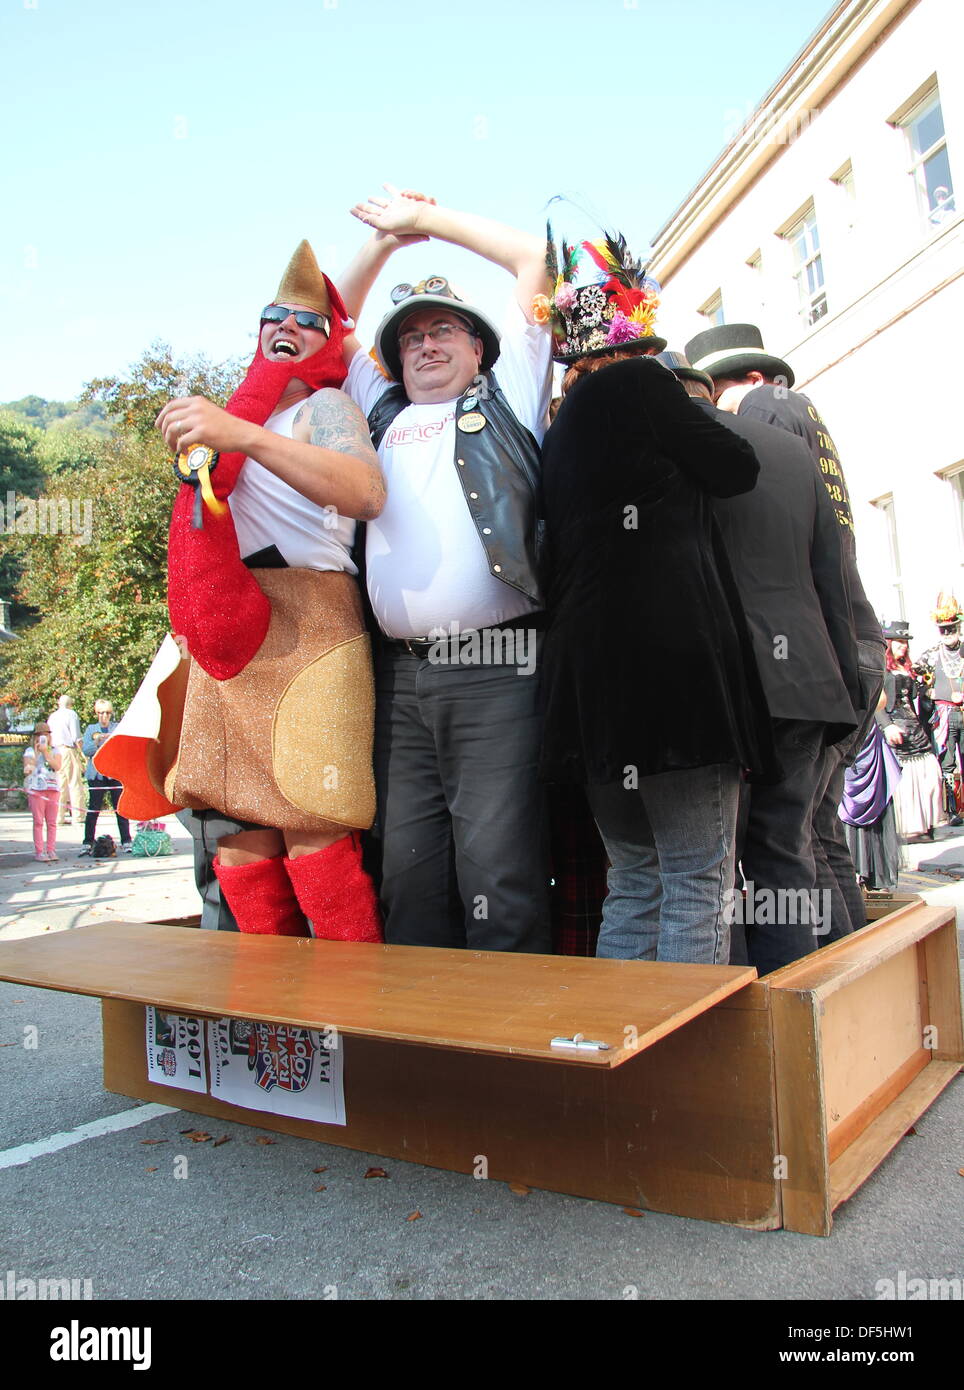 Derbyshire, UK. 28 Sept 2013. The Official Monster Raving Loony Party holds its traditional cabinet re-shuffle where party members and supporters climb inside a wooden cabinet and shuffle. The party conference was held alongside the second annual Steampunk Illuminati event at The Grand Pavilion in Matlock Bath, Derbyshire. Credit:  Deborah Vernon/Alamy Live News Stock Photo